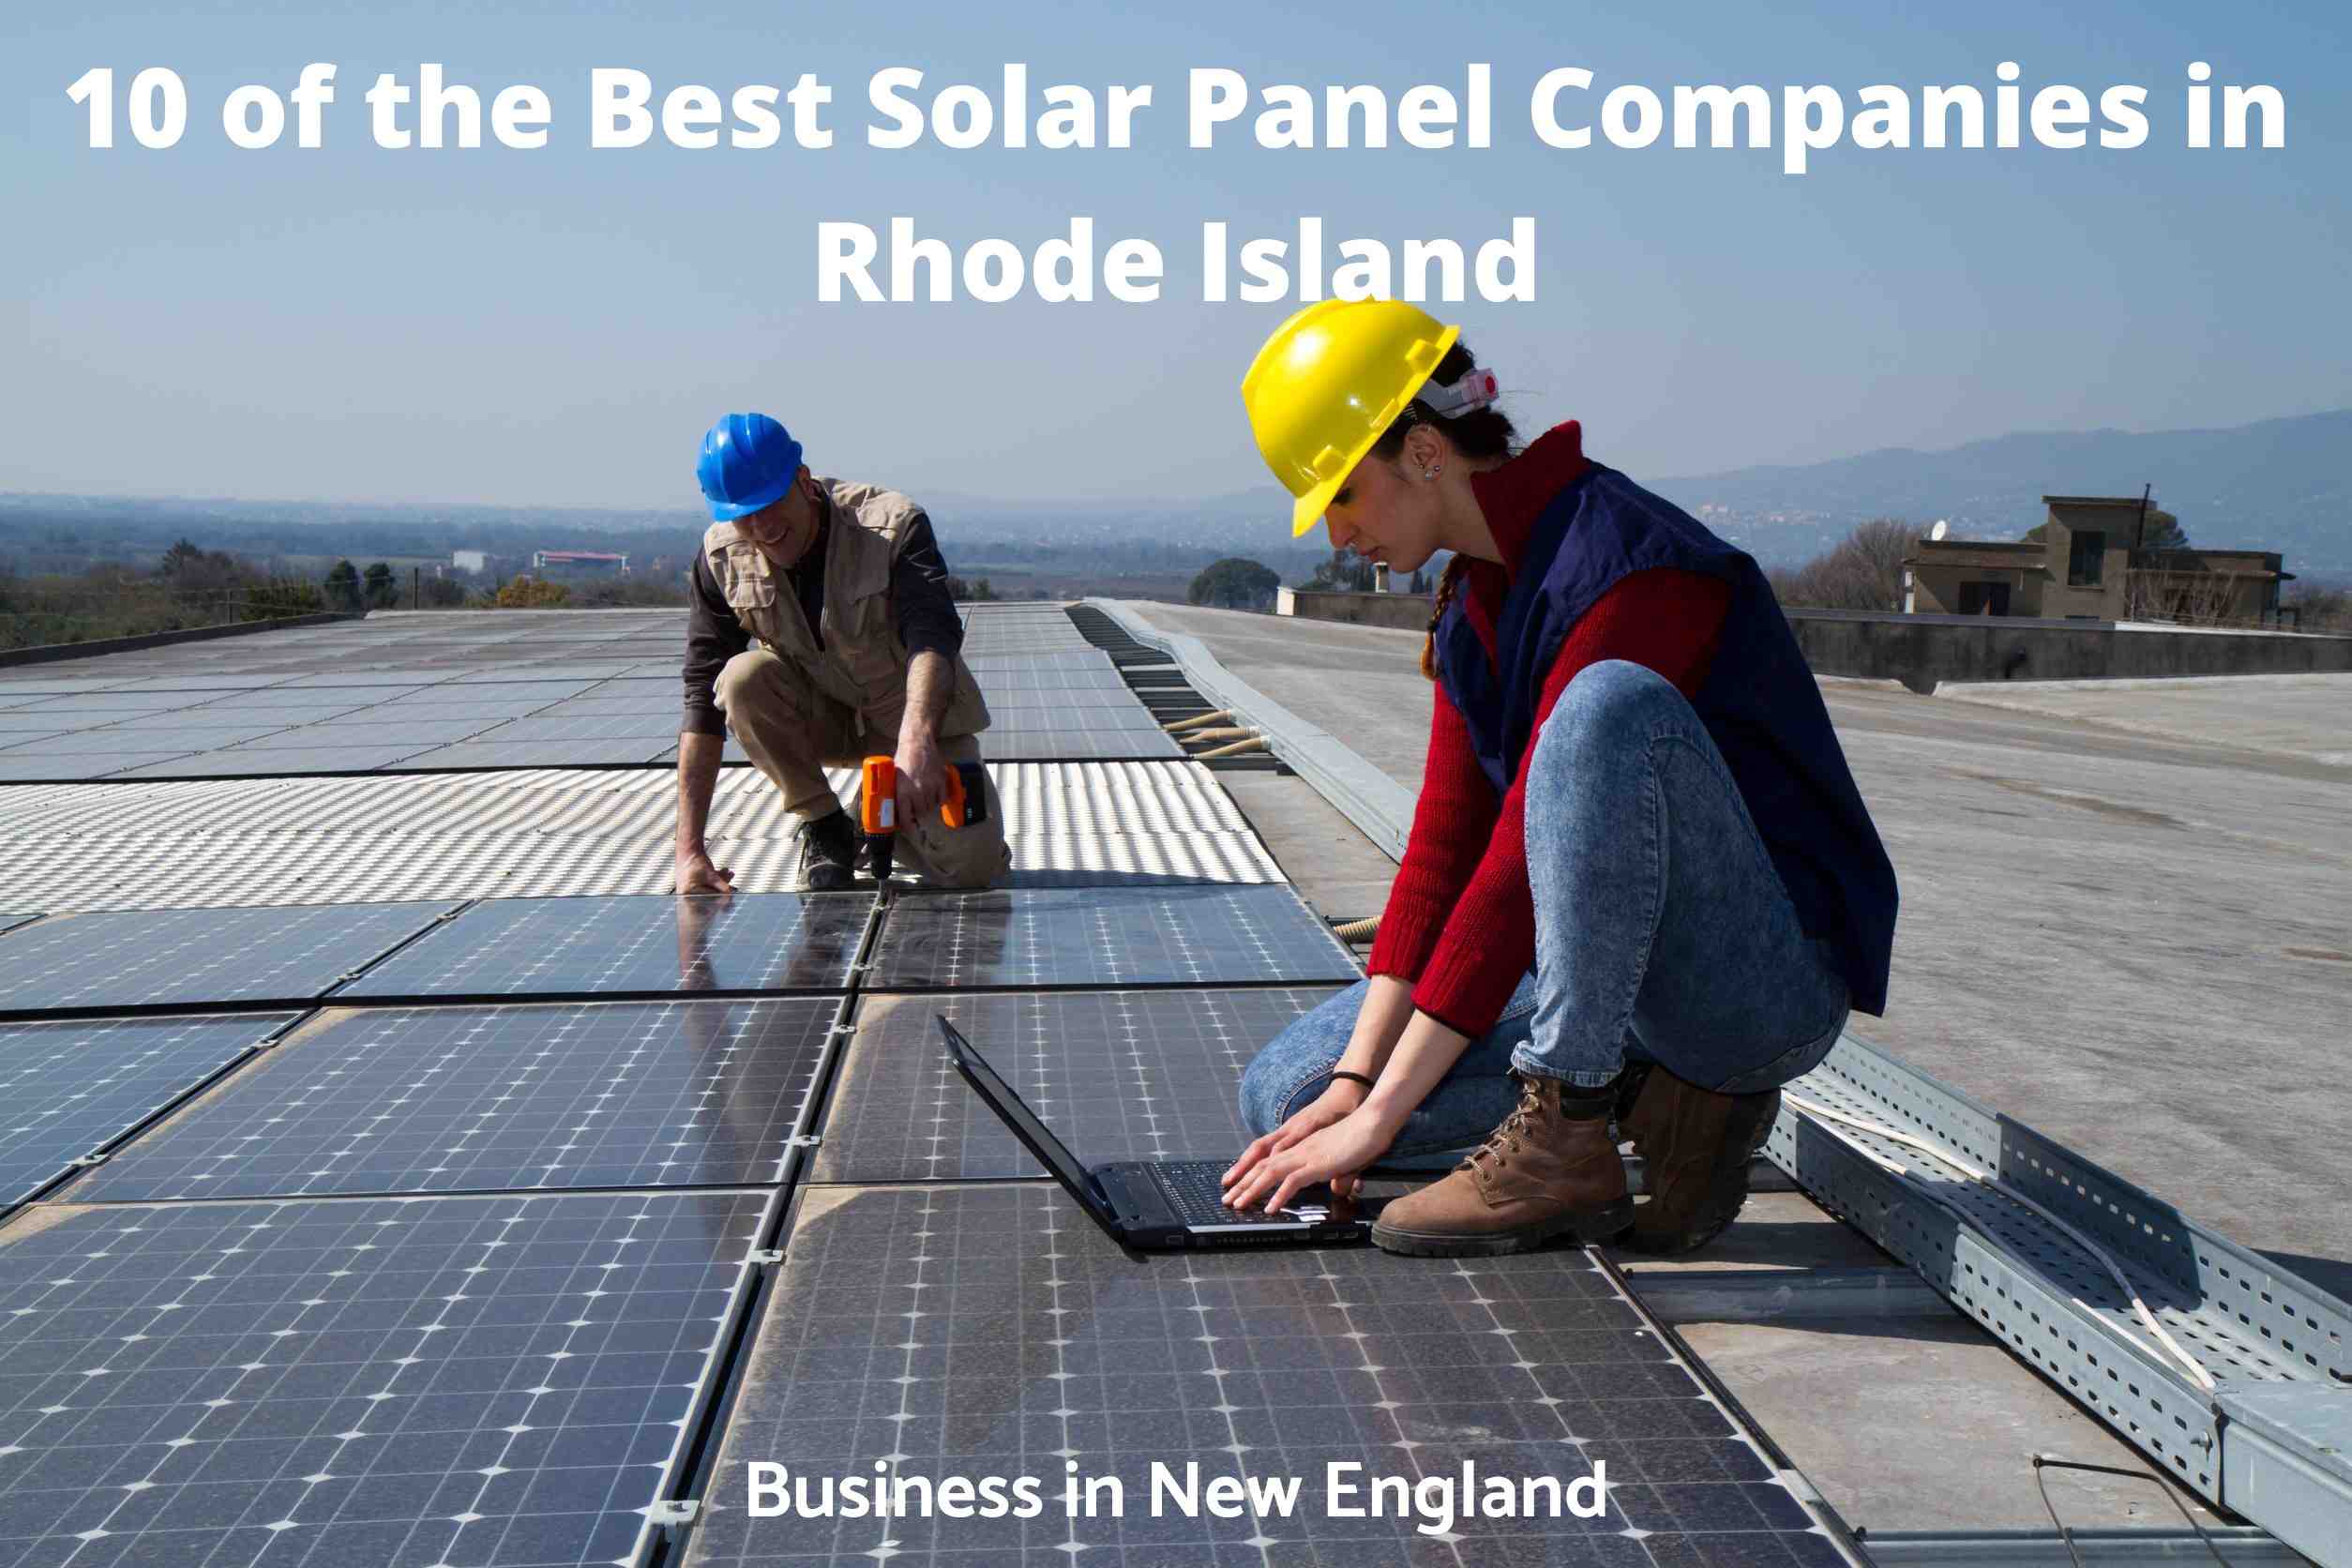 Who is the biggest solar company?